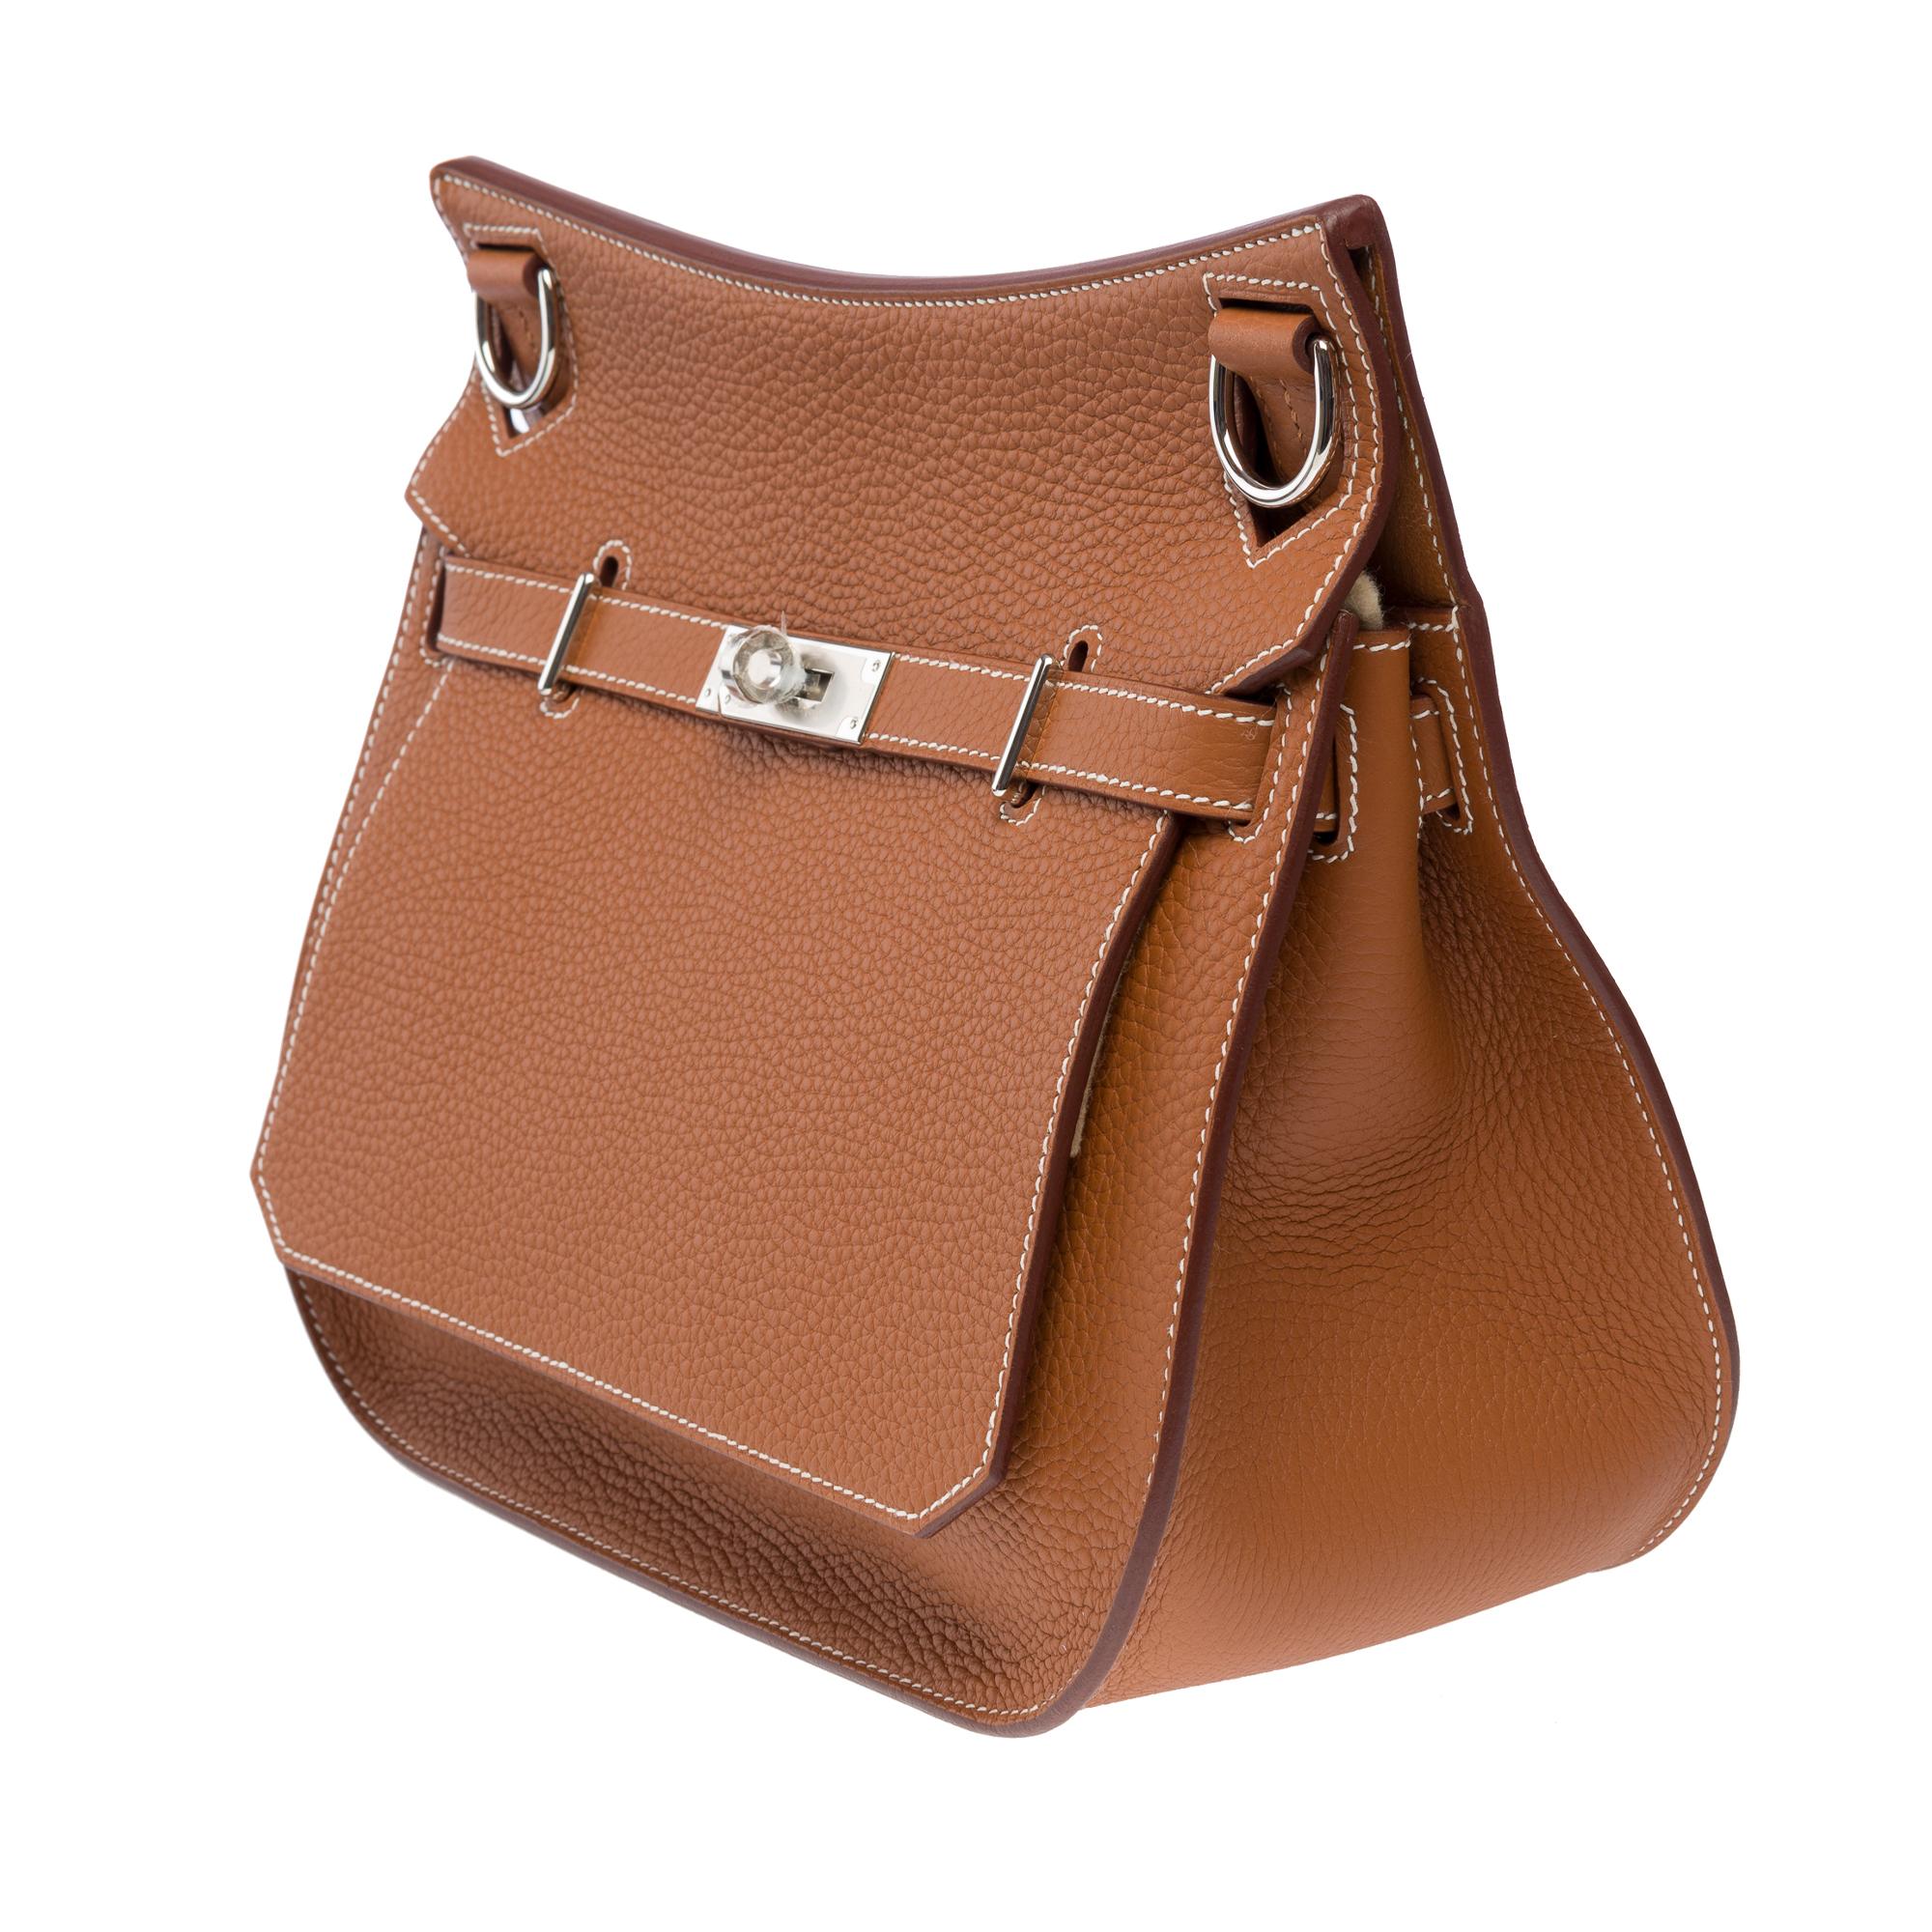 New Hermès Jypsière 28 crossbody bag in Gold Taurillon Clemence leather, PHW For Sale 1